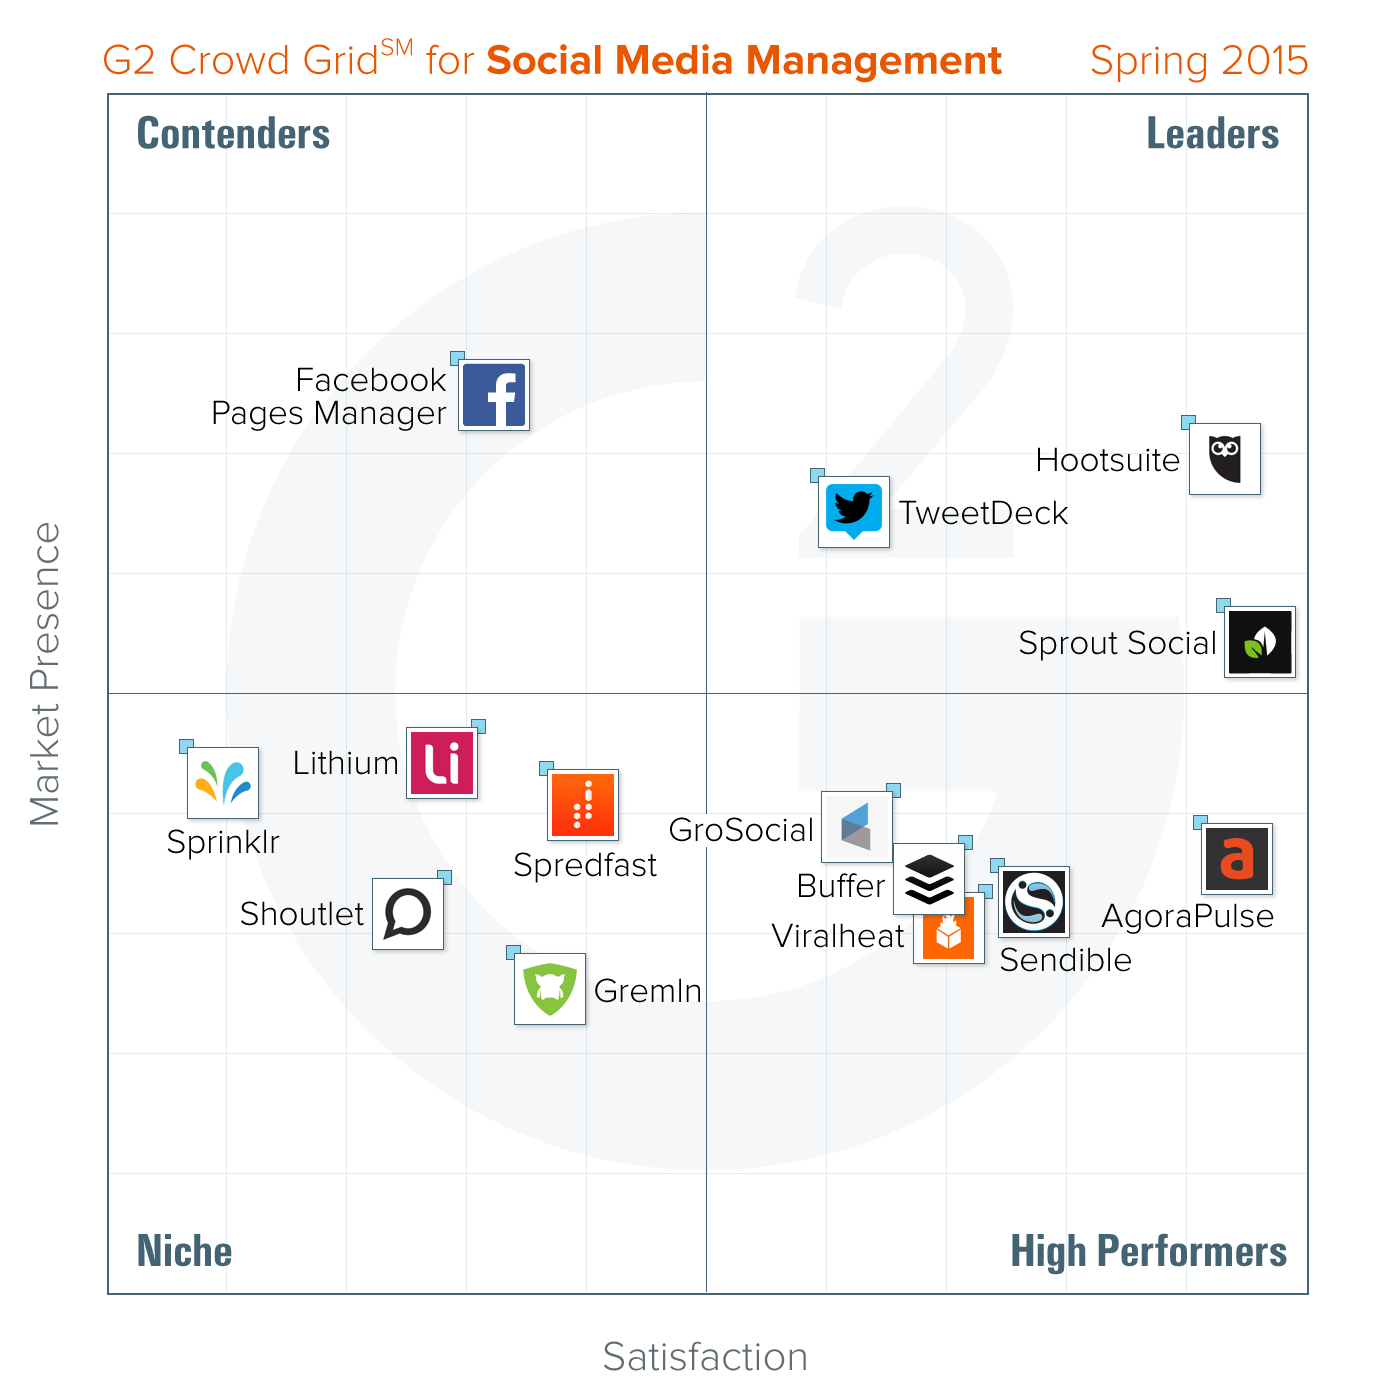 The G2 Crowd "Grid" for social media management tools